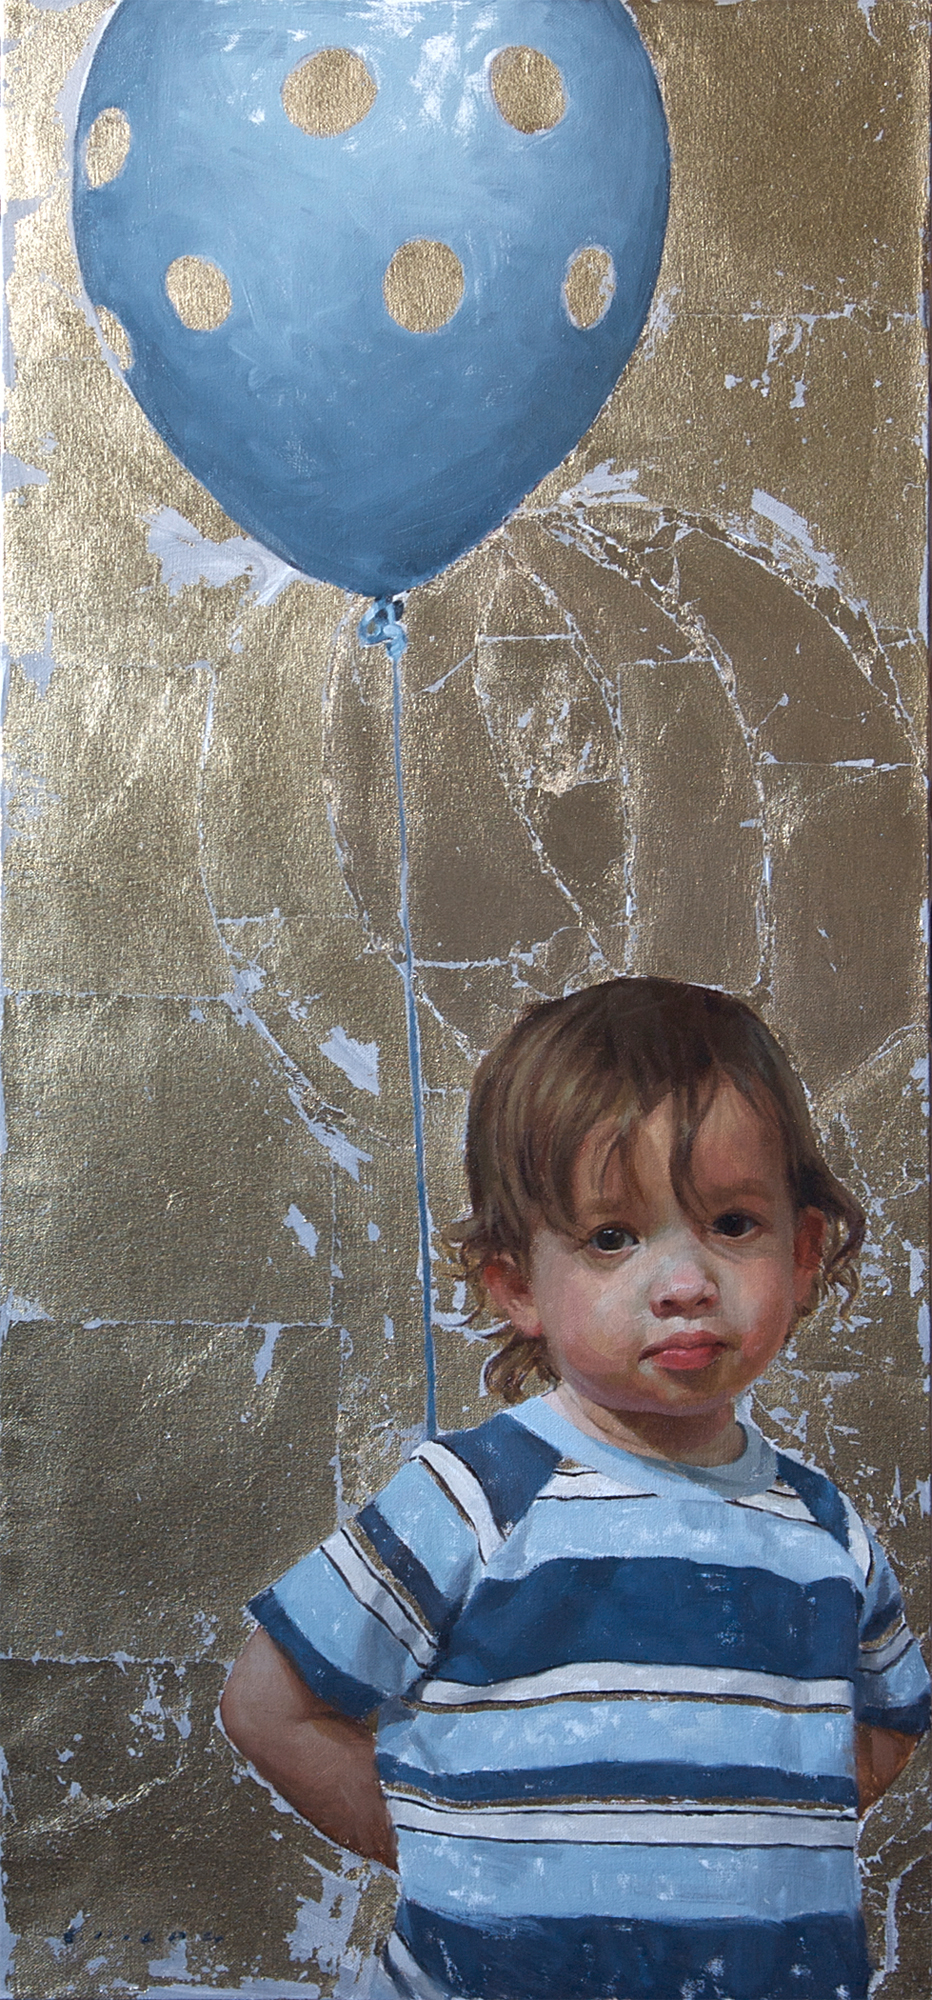 Casey Childs, "Apprehension," 32 x 15 inches, Oil and gold leaf on linen